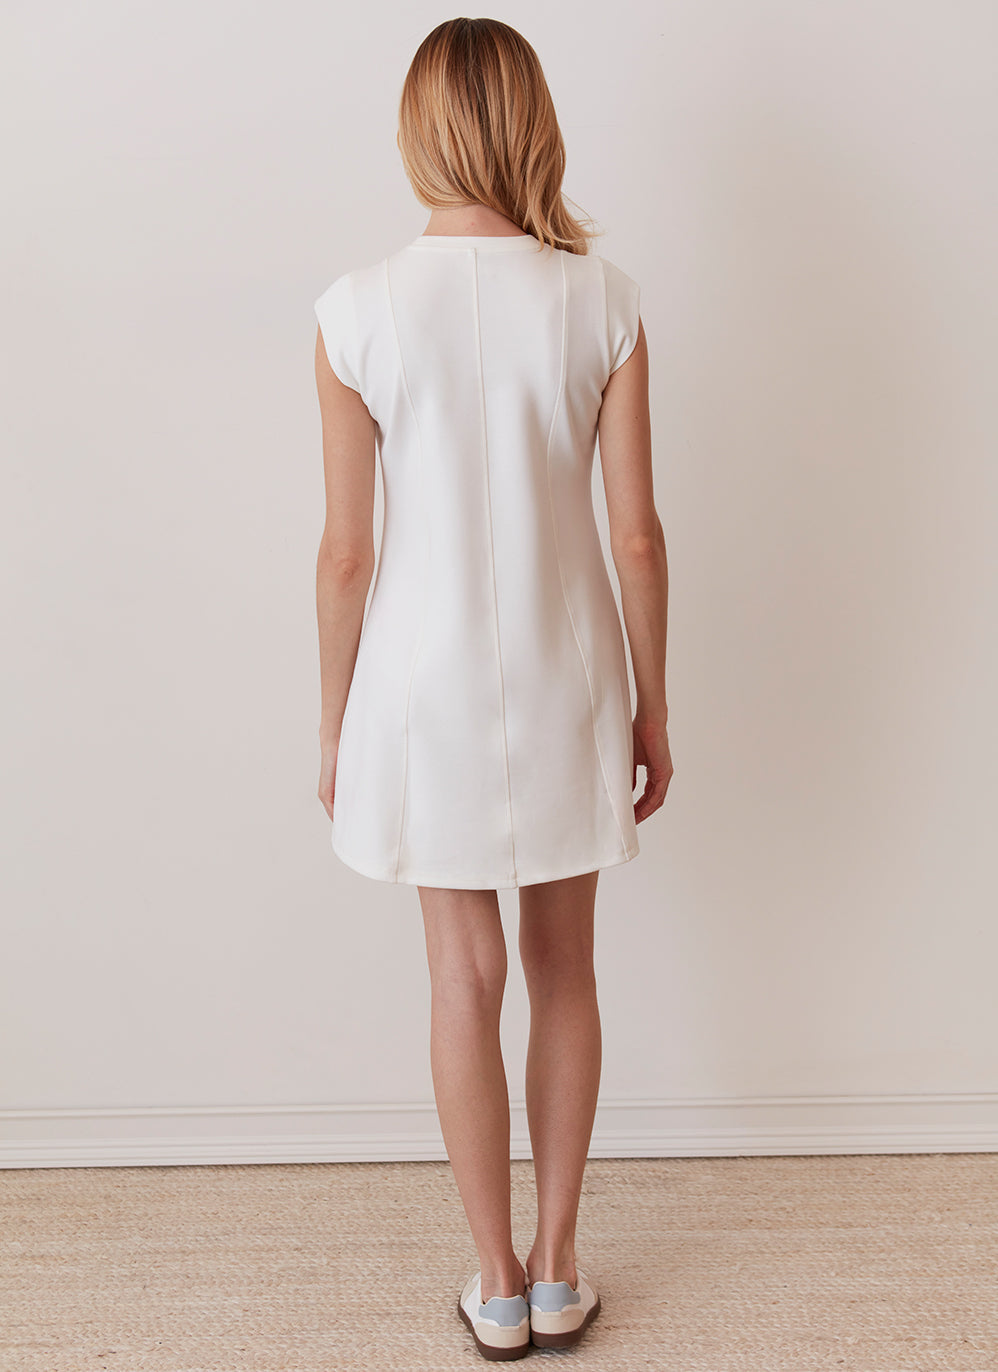 white mini dress for everyday casual wear